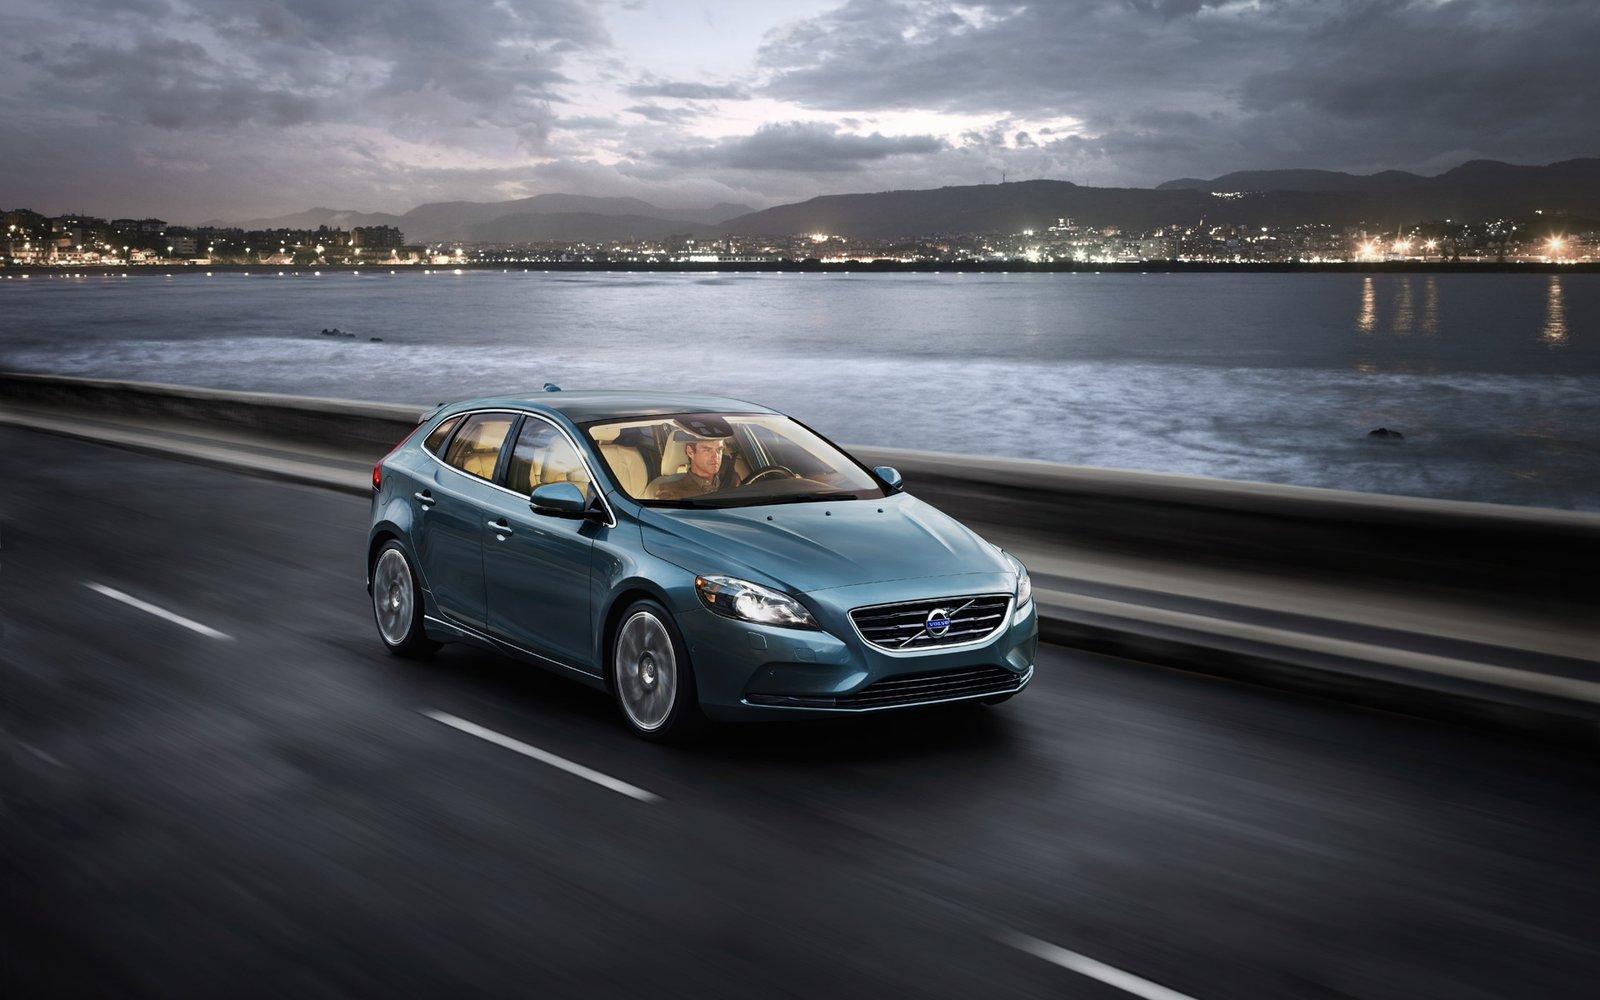 Volvo V40 2013 photo 81796 picture at high resolution